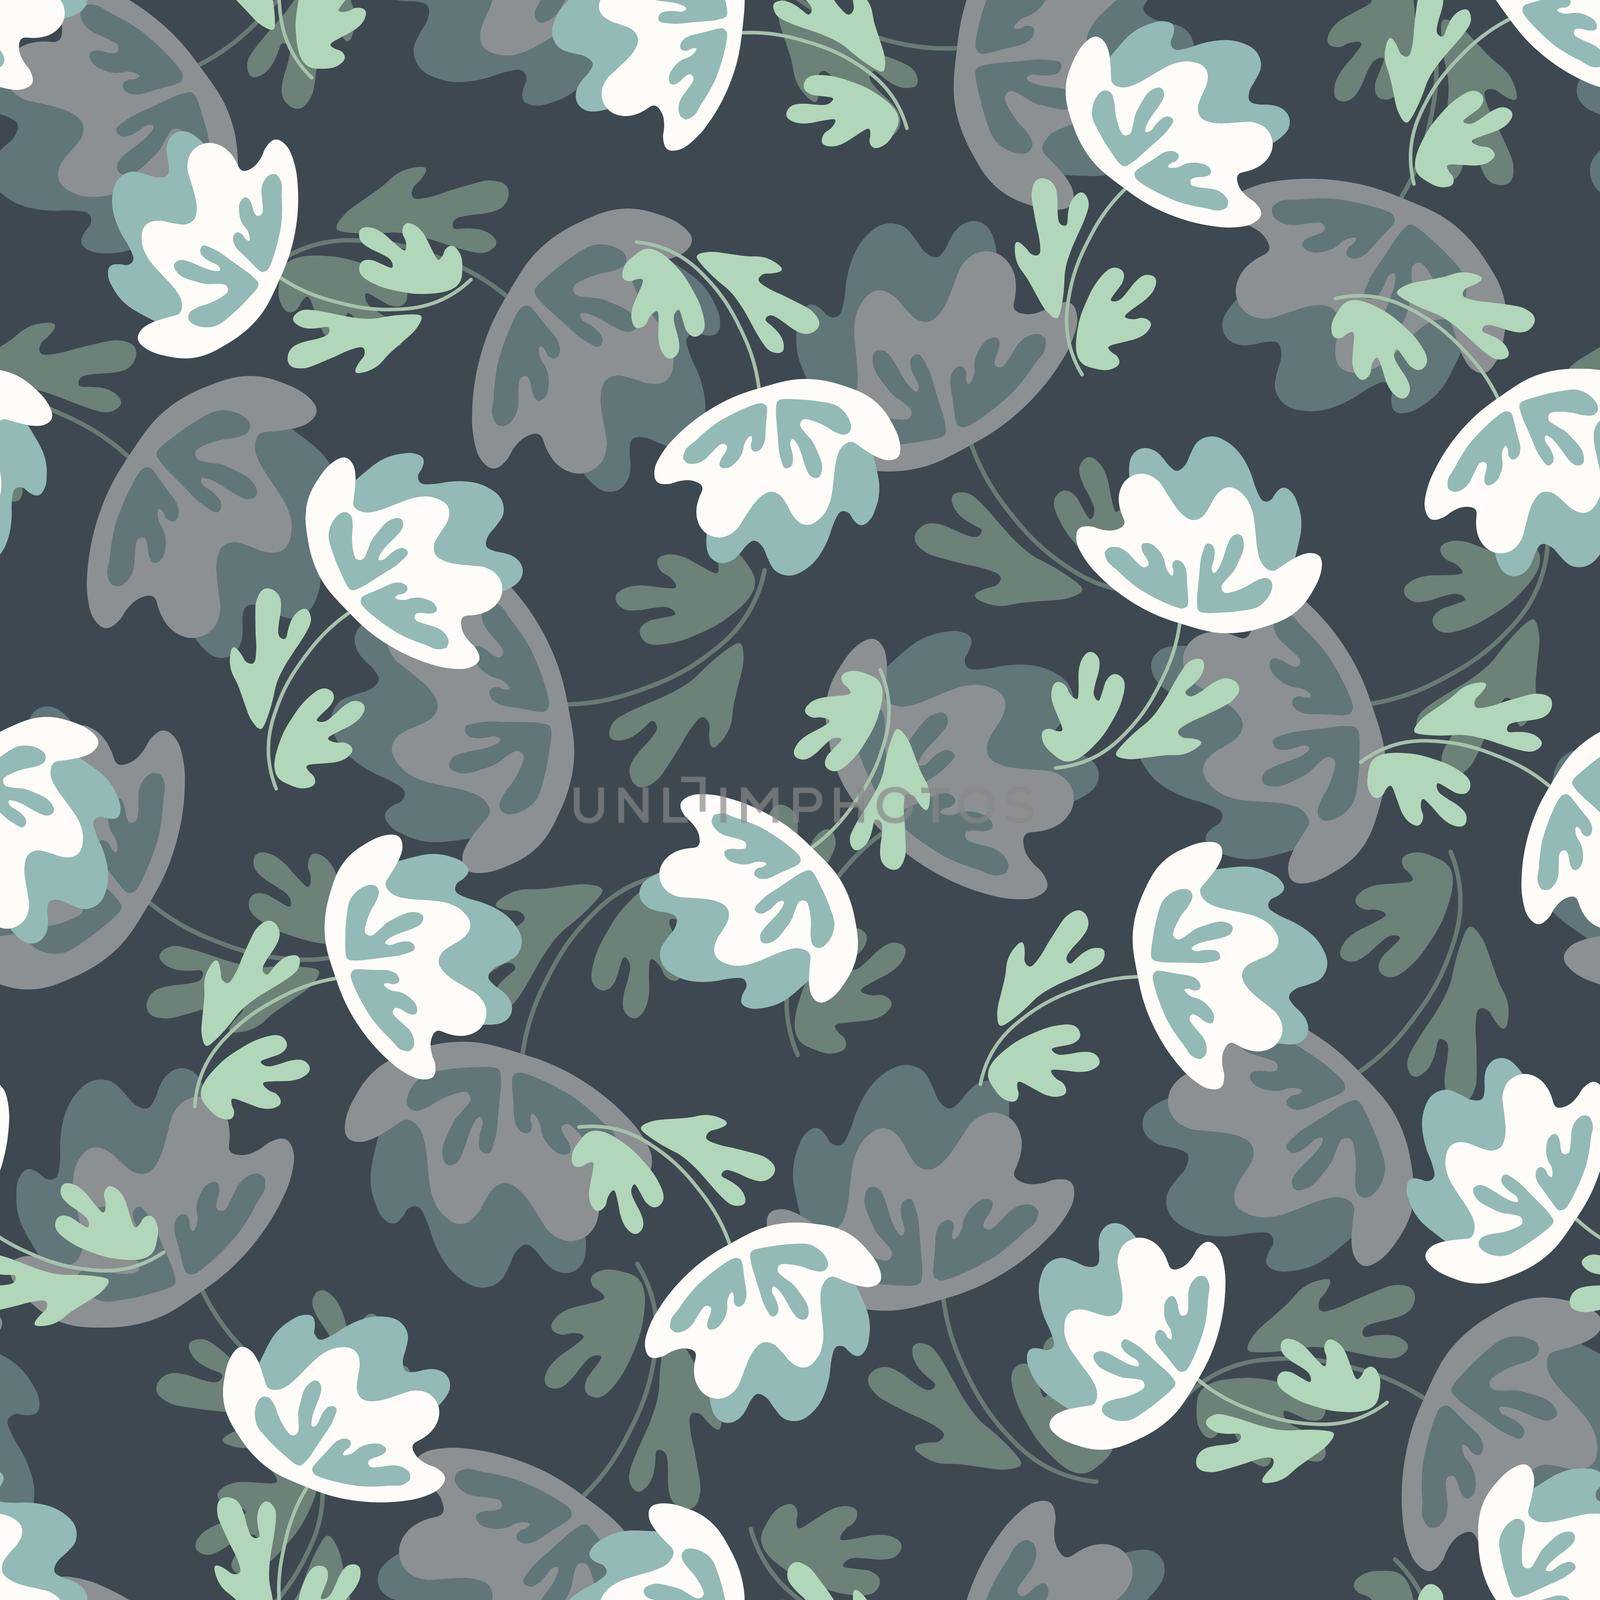 Seamless floral pattern based on traditional folk art ornaments. Modern flowers on color background. Scandinavian style. Sweden nordic style. Vector illustration. Simple minimalistic pattern.